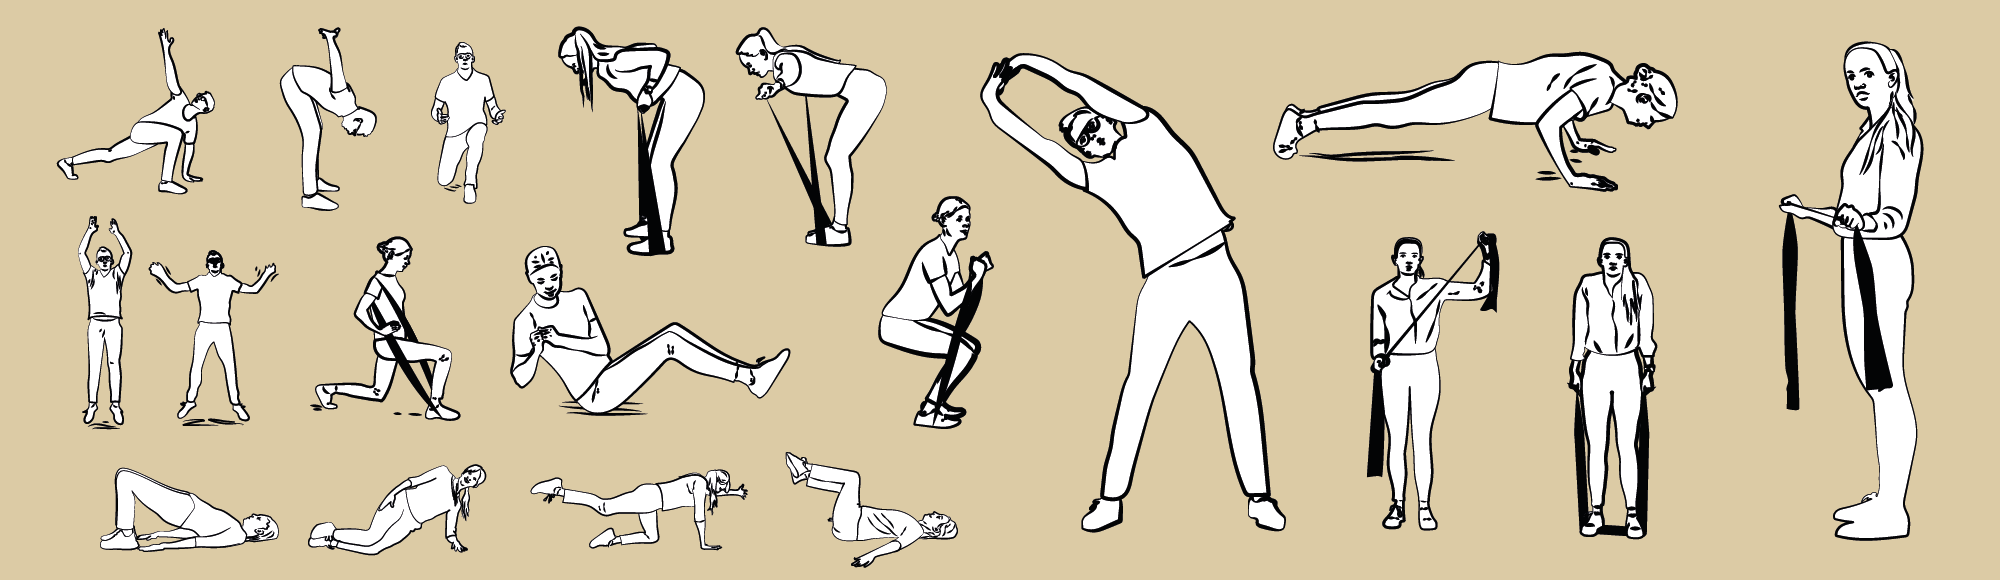 Graphic illustration of people doing exercises